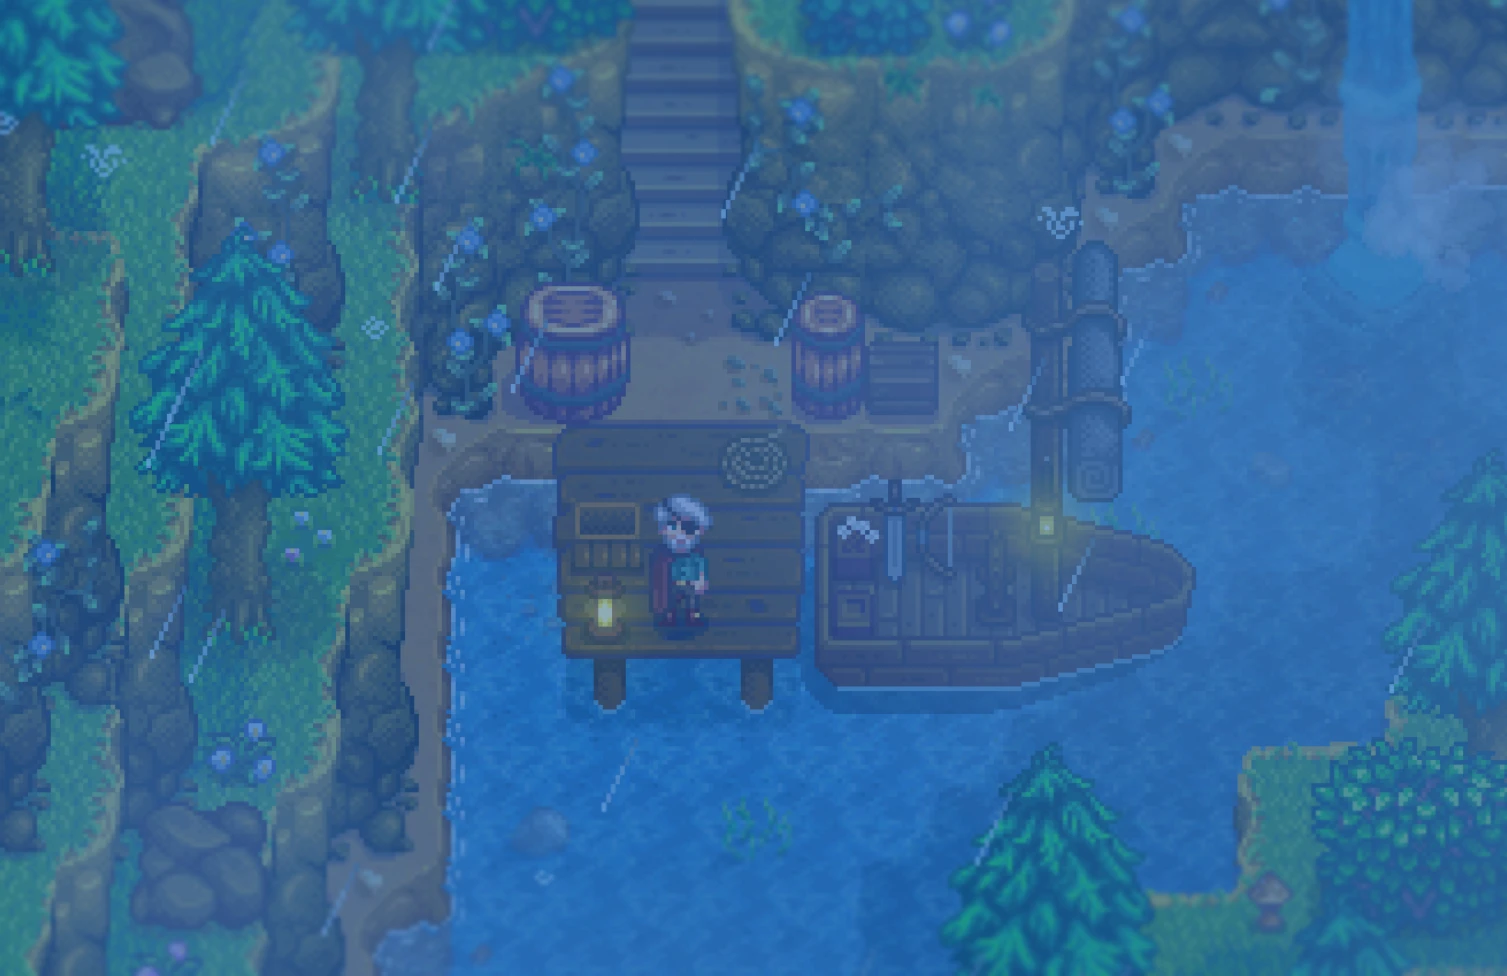 How to repair the boat in stardew valley